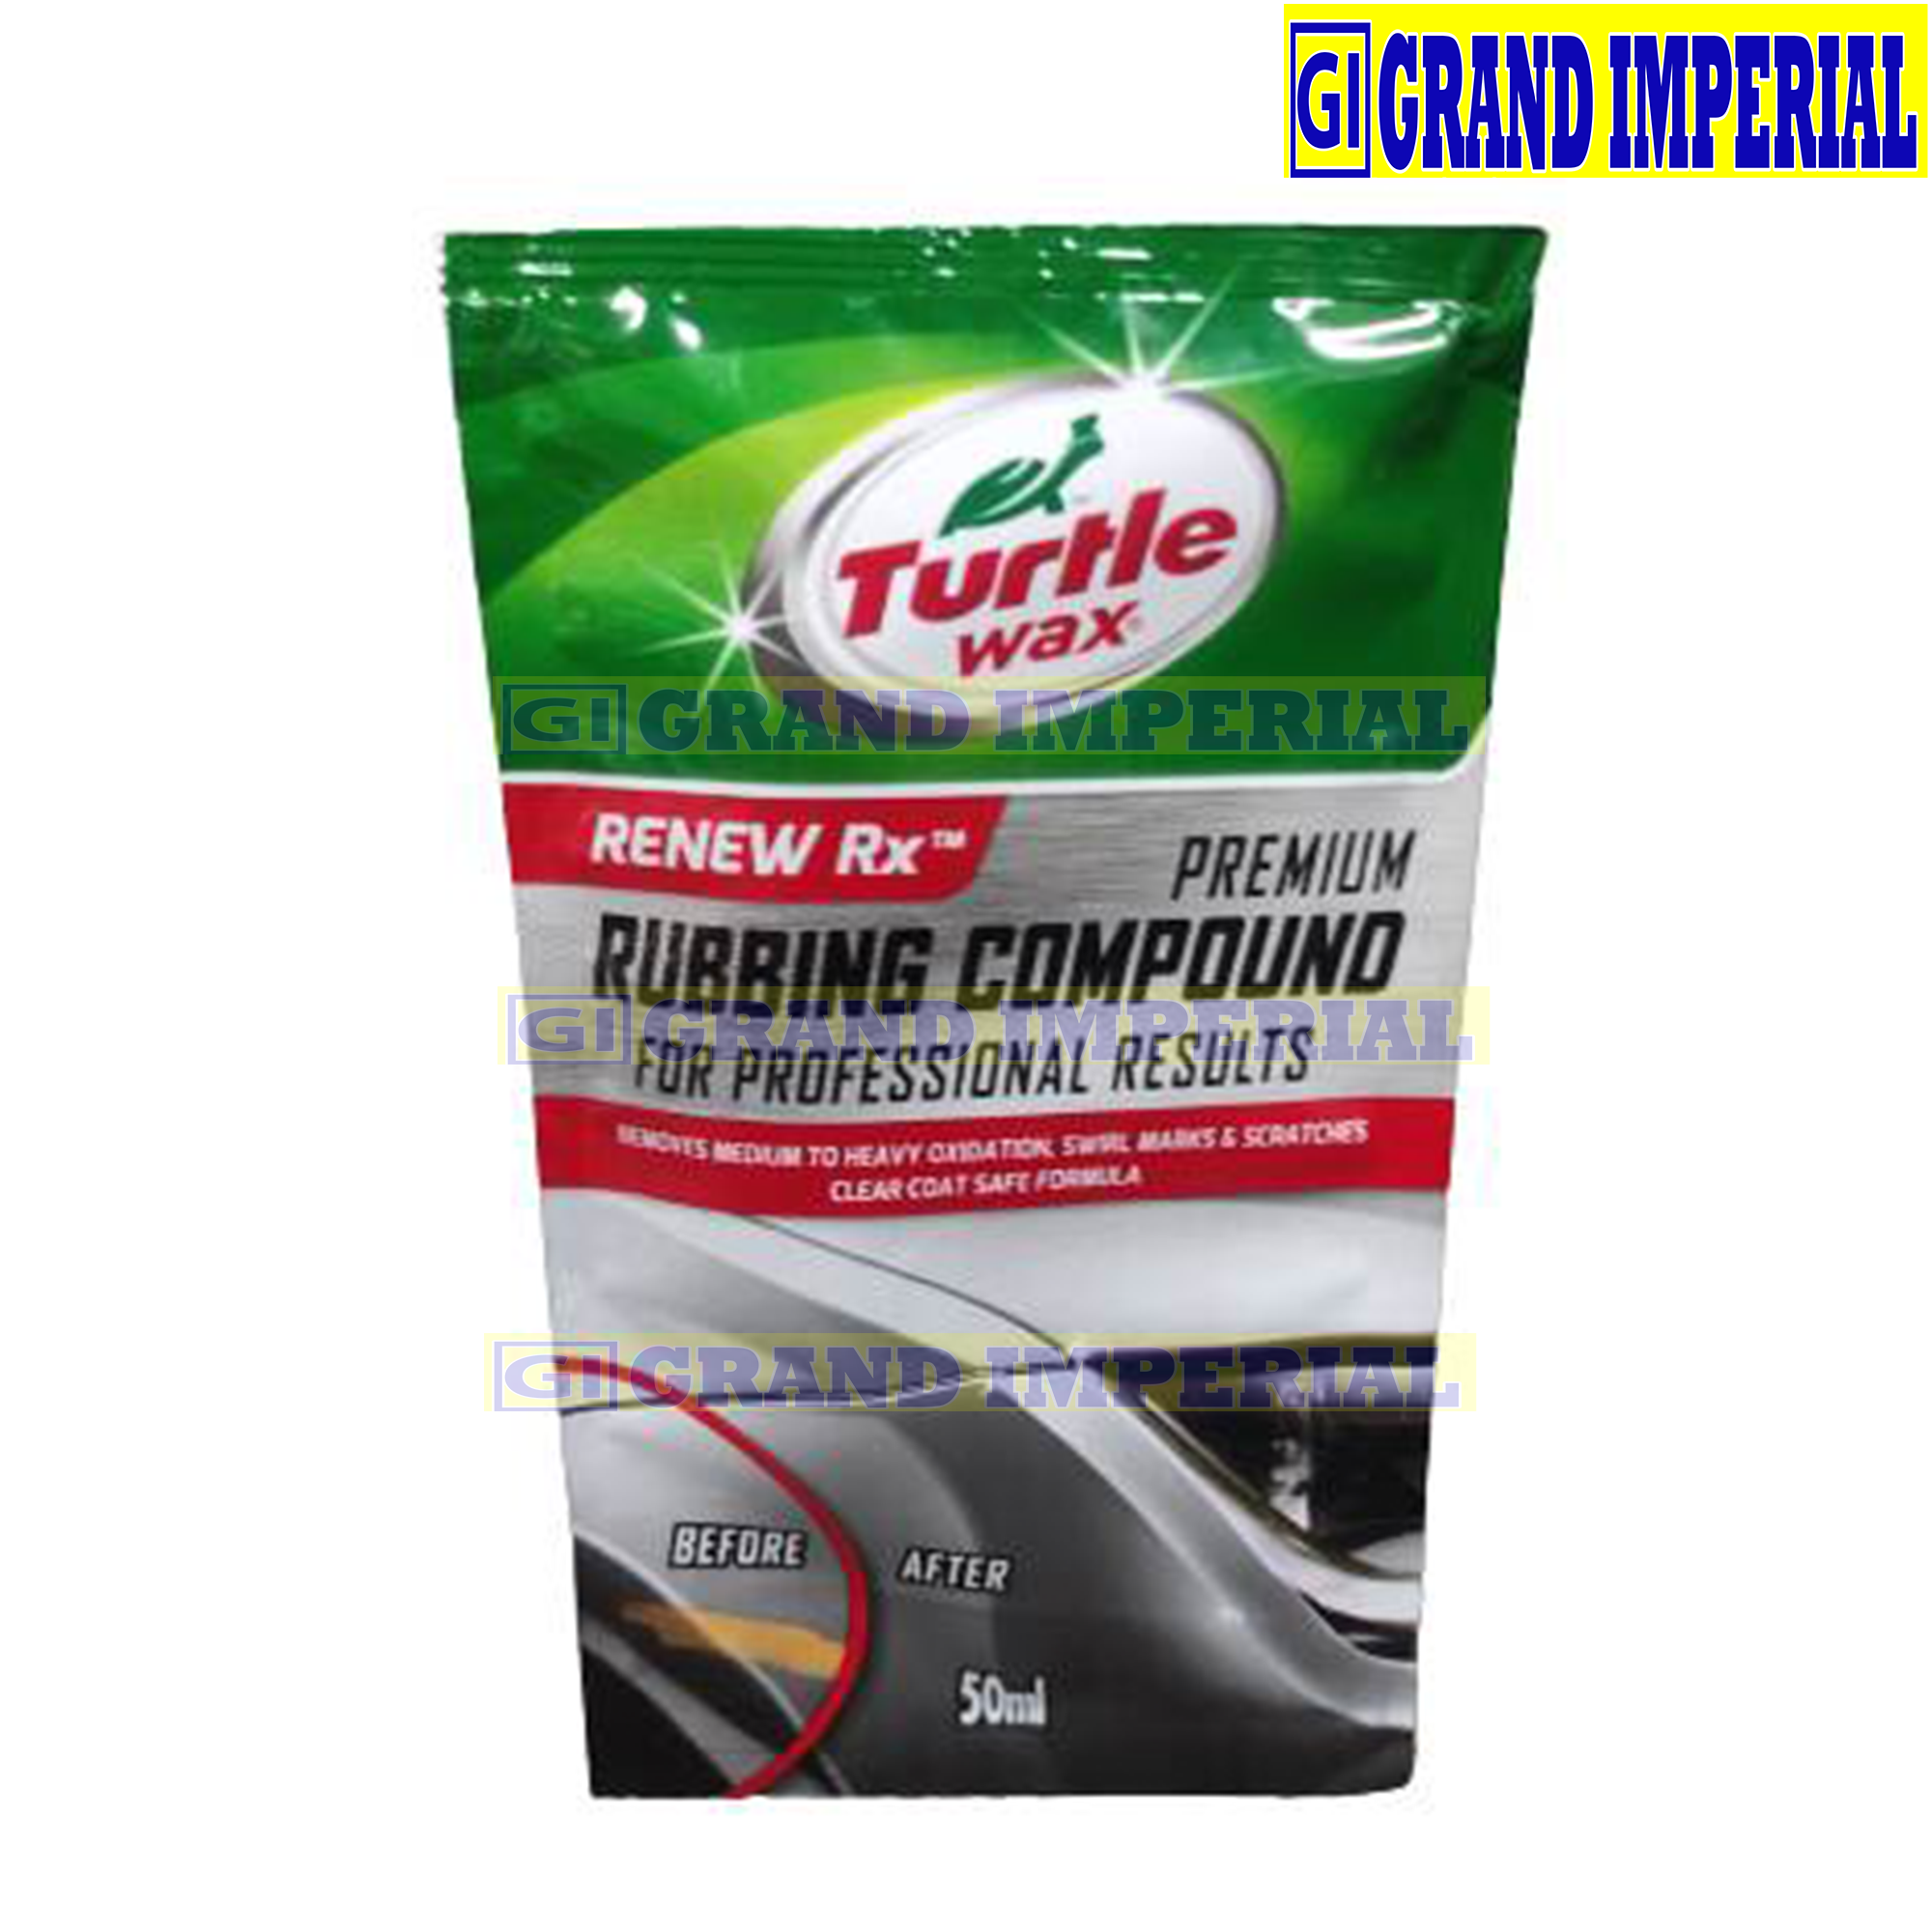 Turtle Wax Rubbing Compound Premium (RENEW Rx) 50ml Grand Imperial  Industrial Tools Supplies